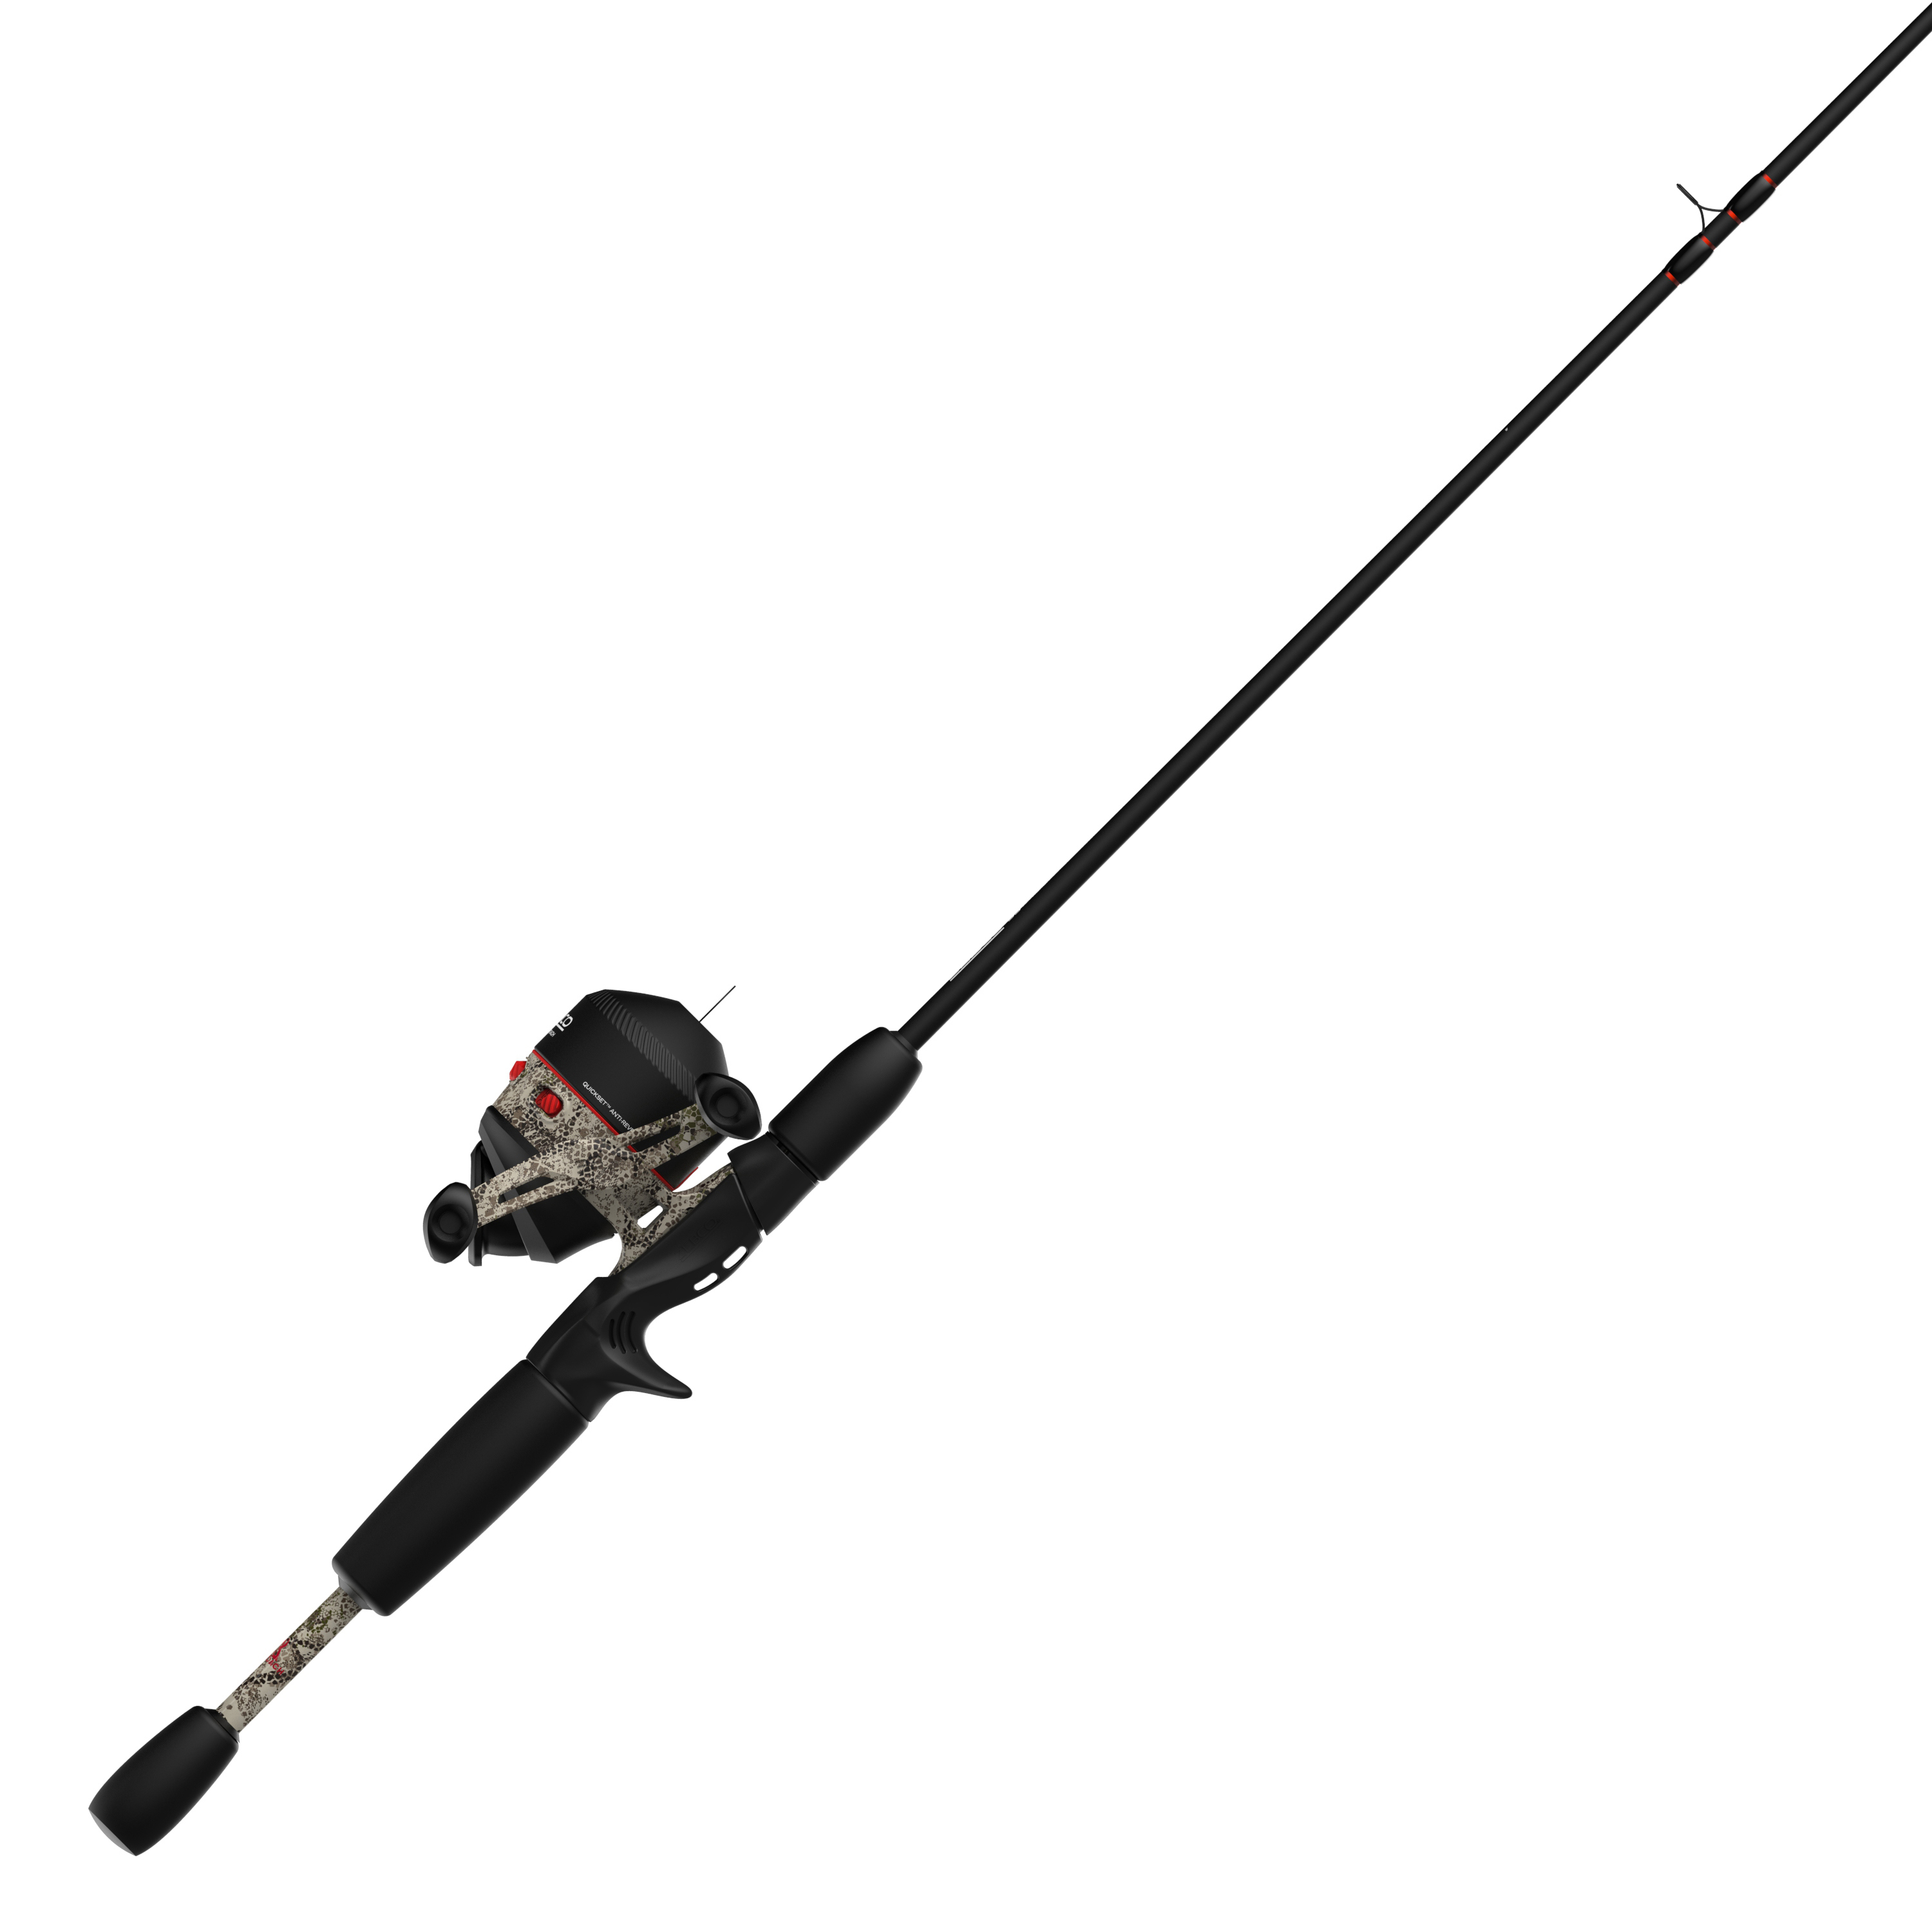 Zebco 33 Cork Reel and Fishing Rod Combo, Graphite India